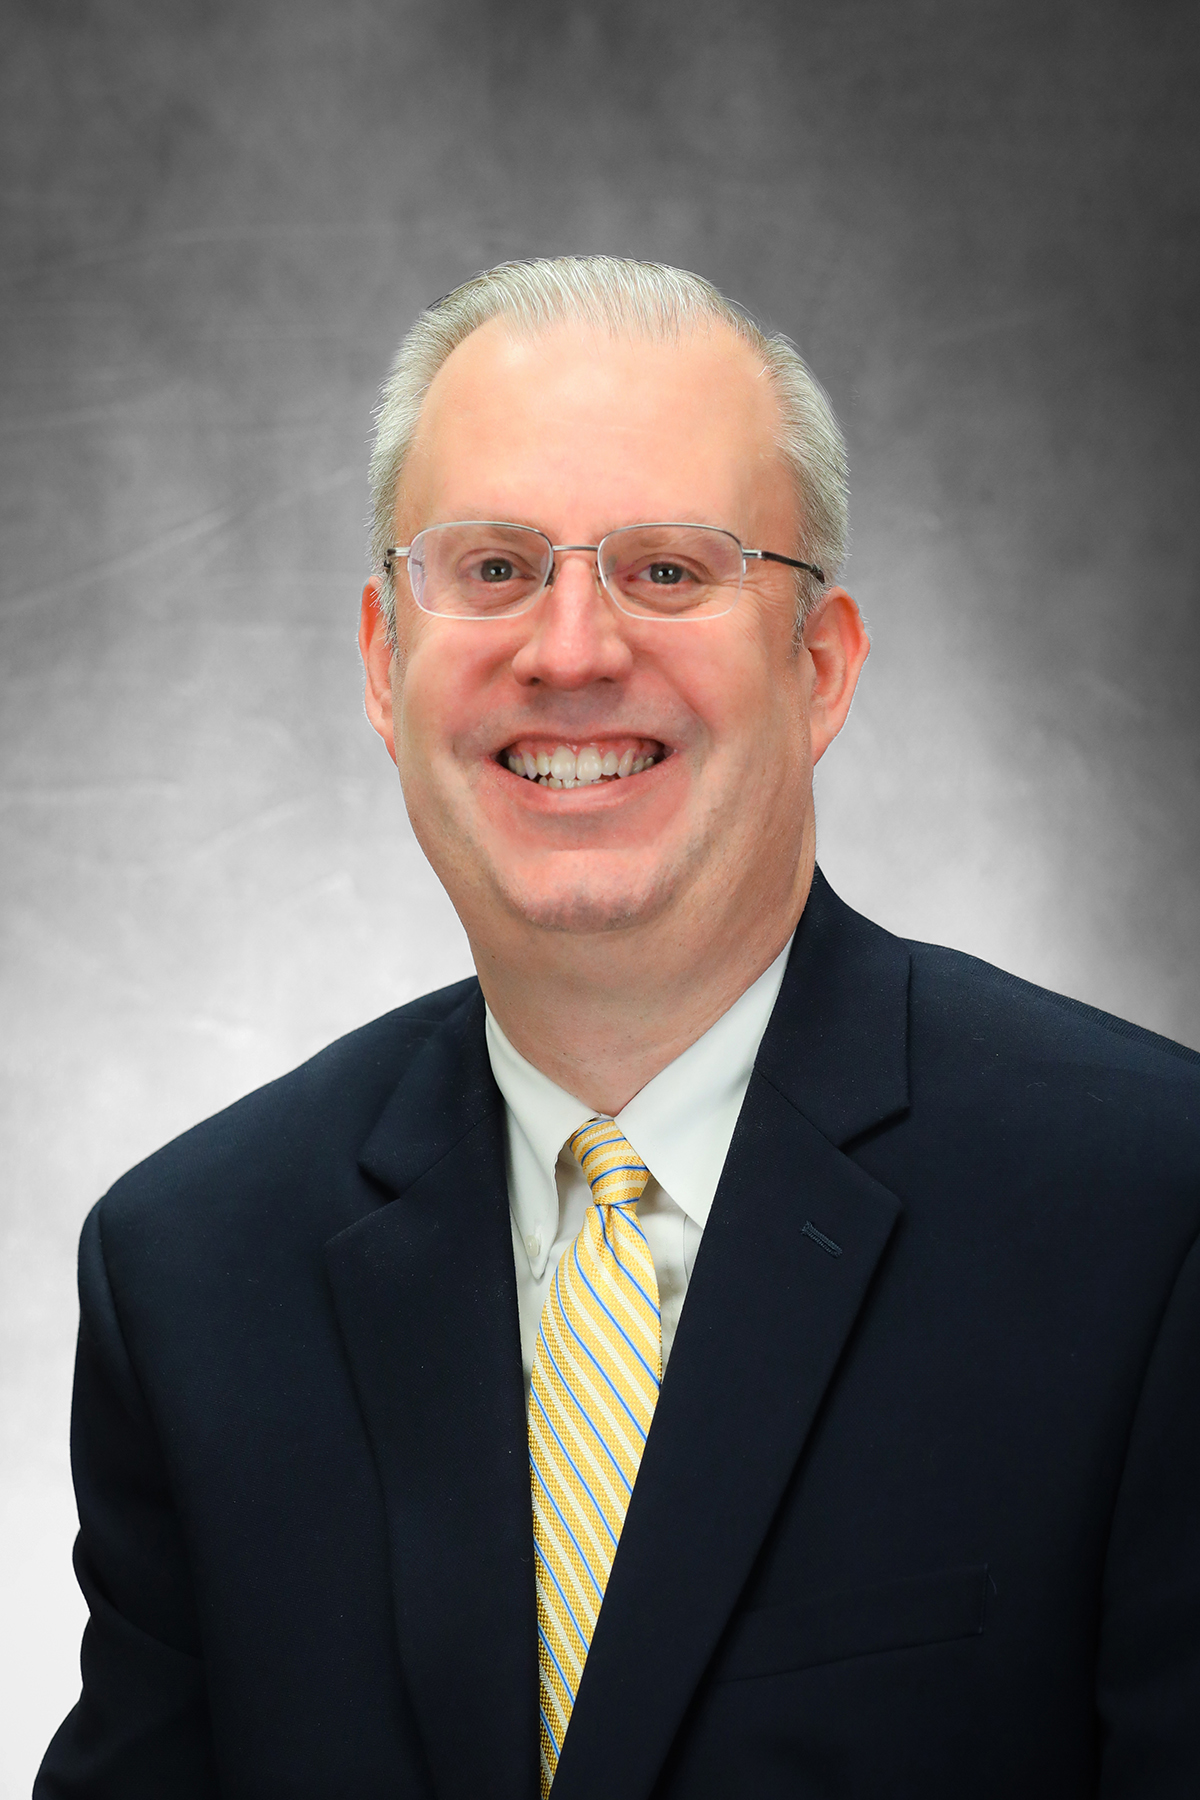 Smiling white man wearing glasses and a suit